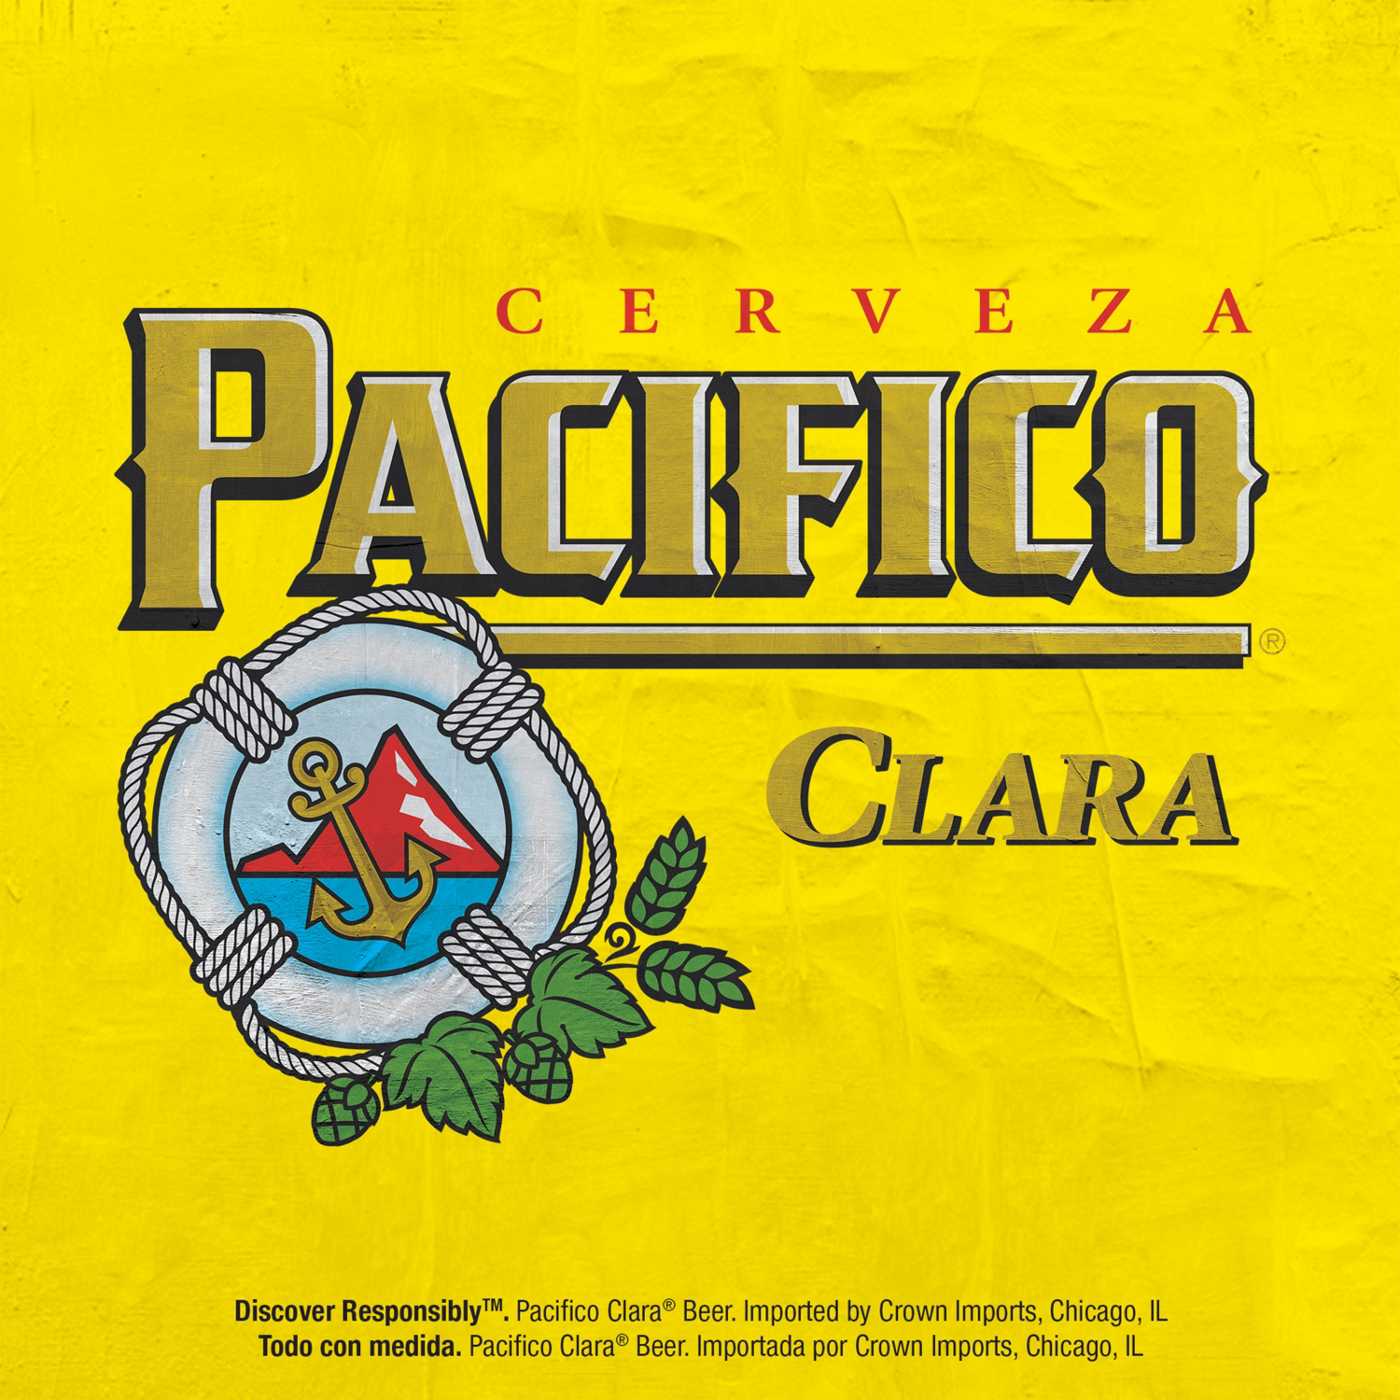 Pacifico Clara Mexican Lager Import Beer 12 oz Bottles, 6 pk; image 5 of 10